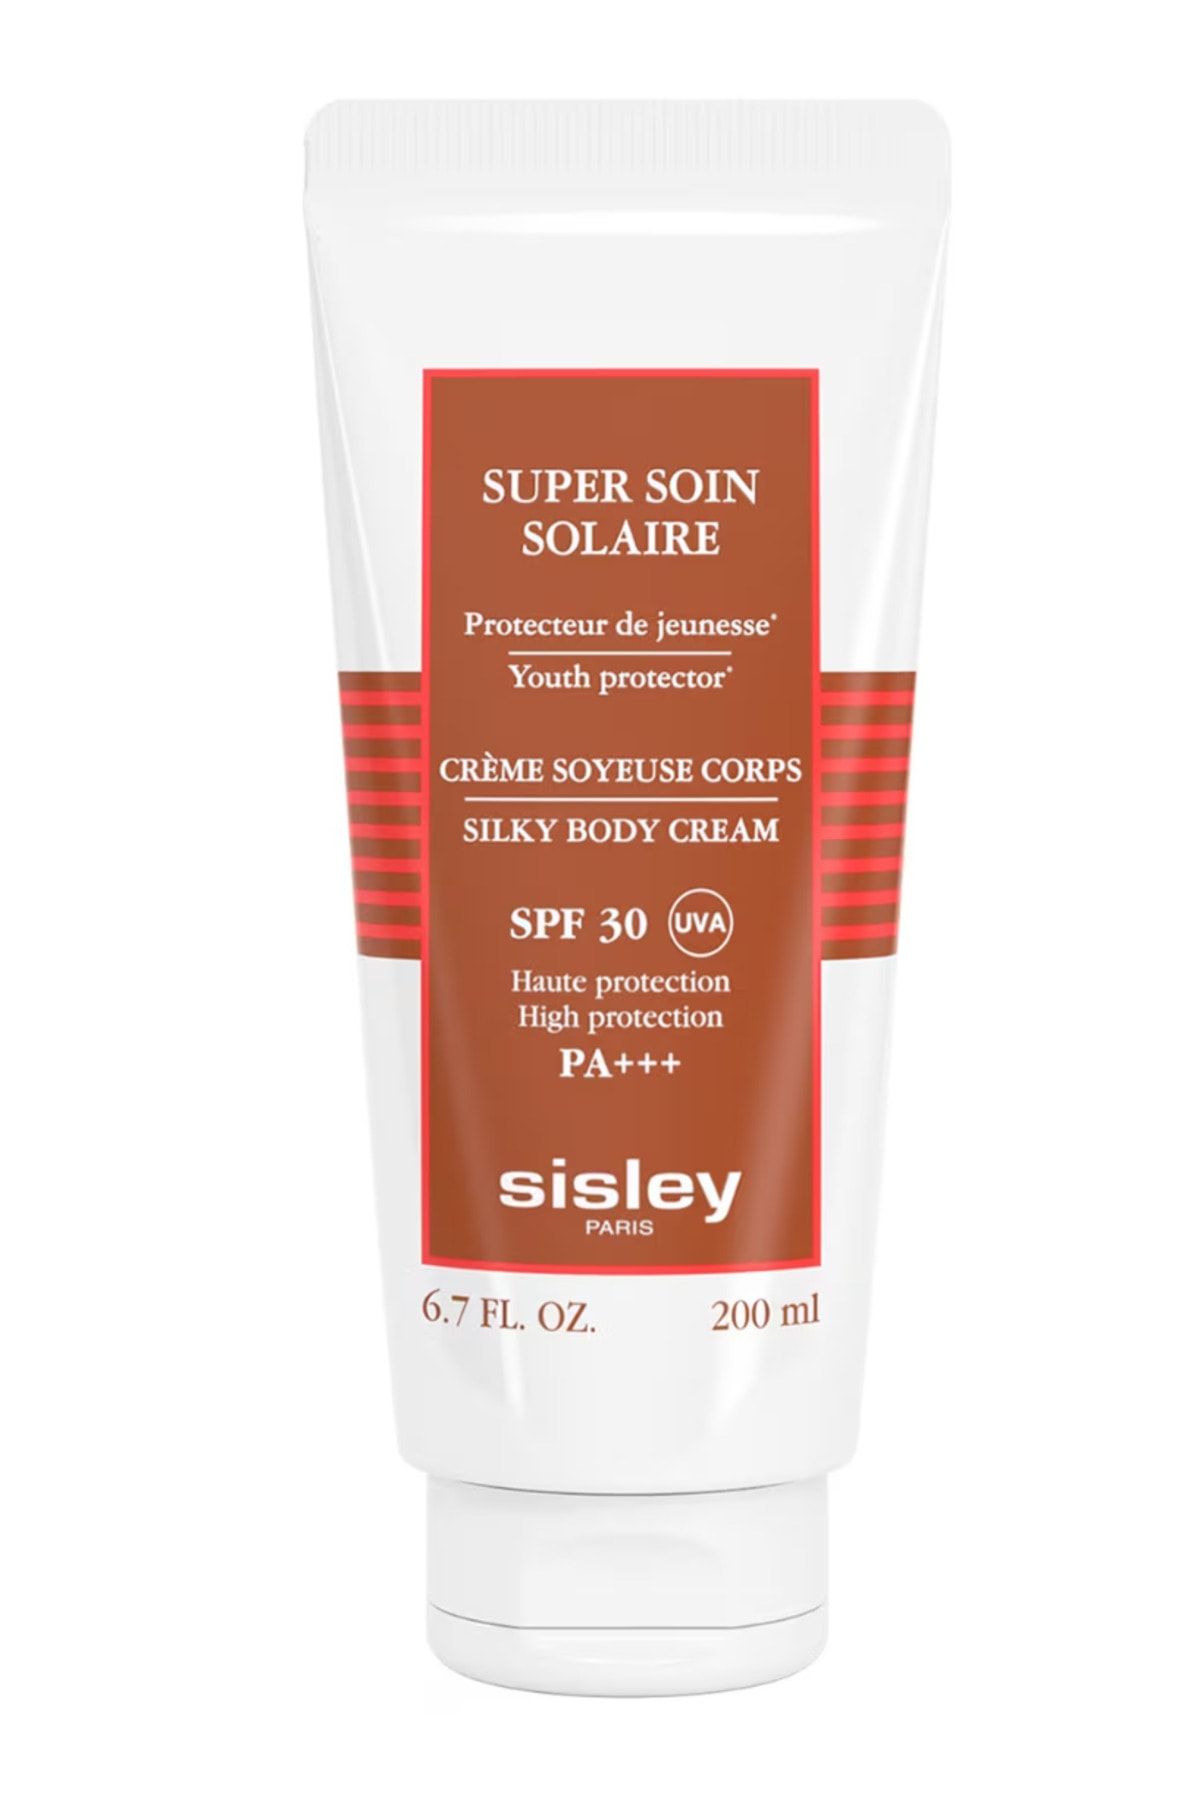 Sisley Super Soin Solaire Creme Soyeuse Corps Spf30 200 Ml